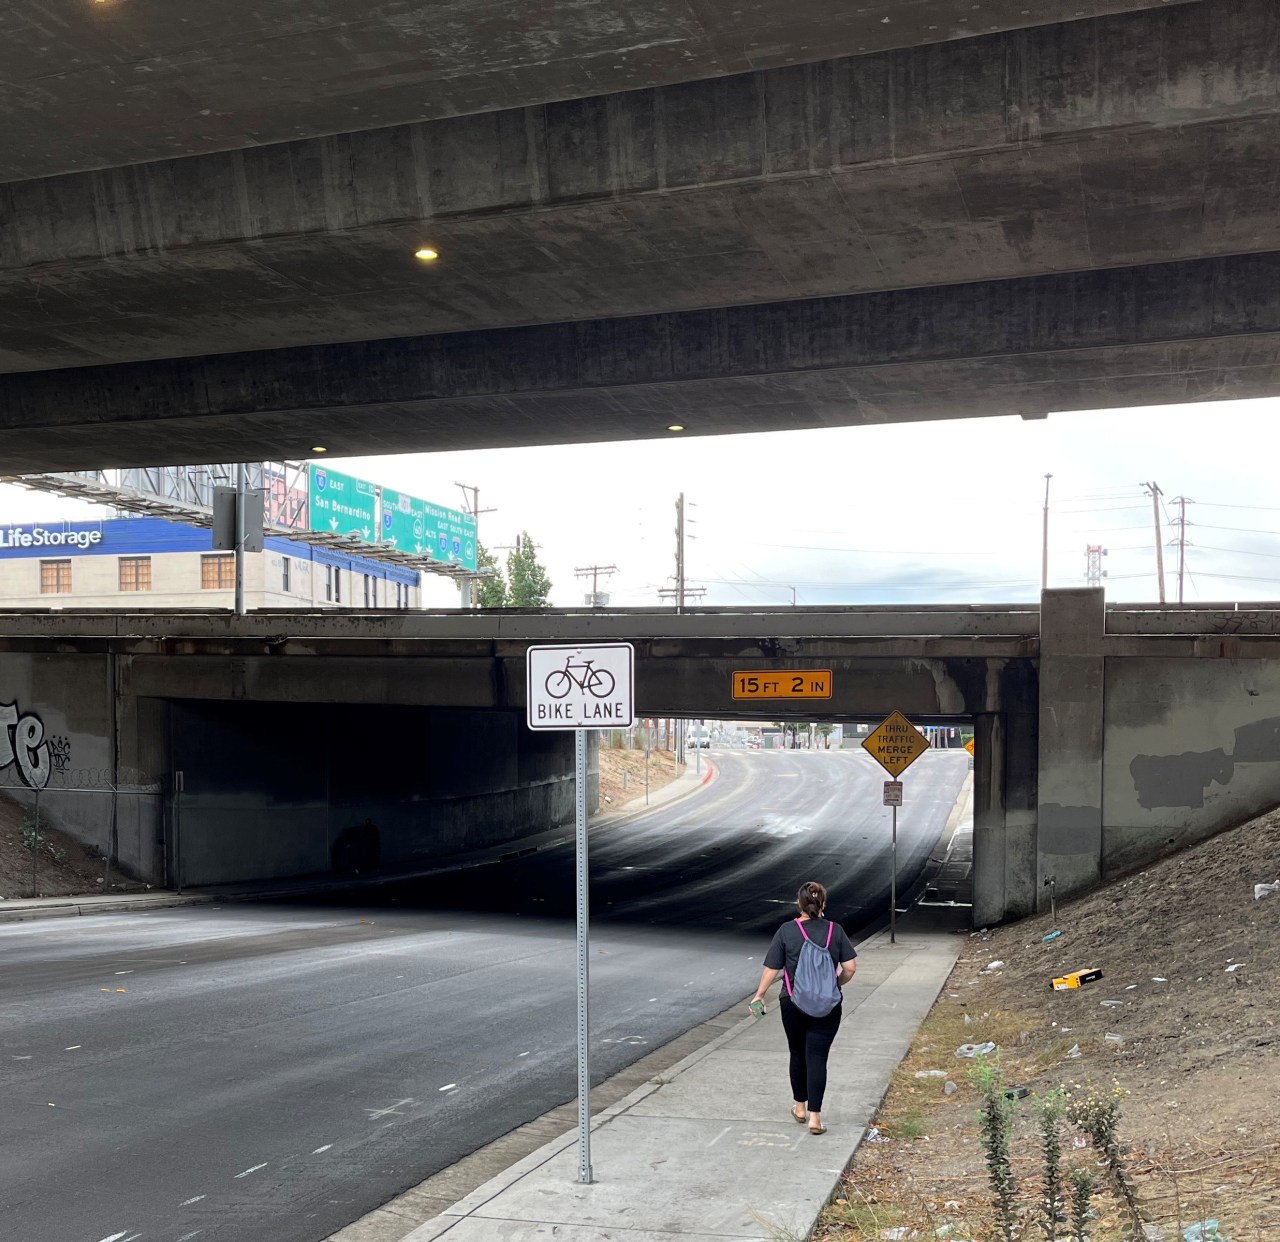 The relatively quiet Ramirez Street crosses under the 101 Freeway. Preliminary bike lane markings and new bike lane sign visible.